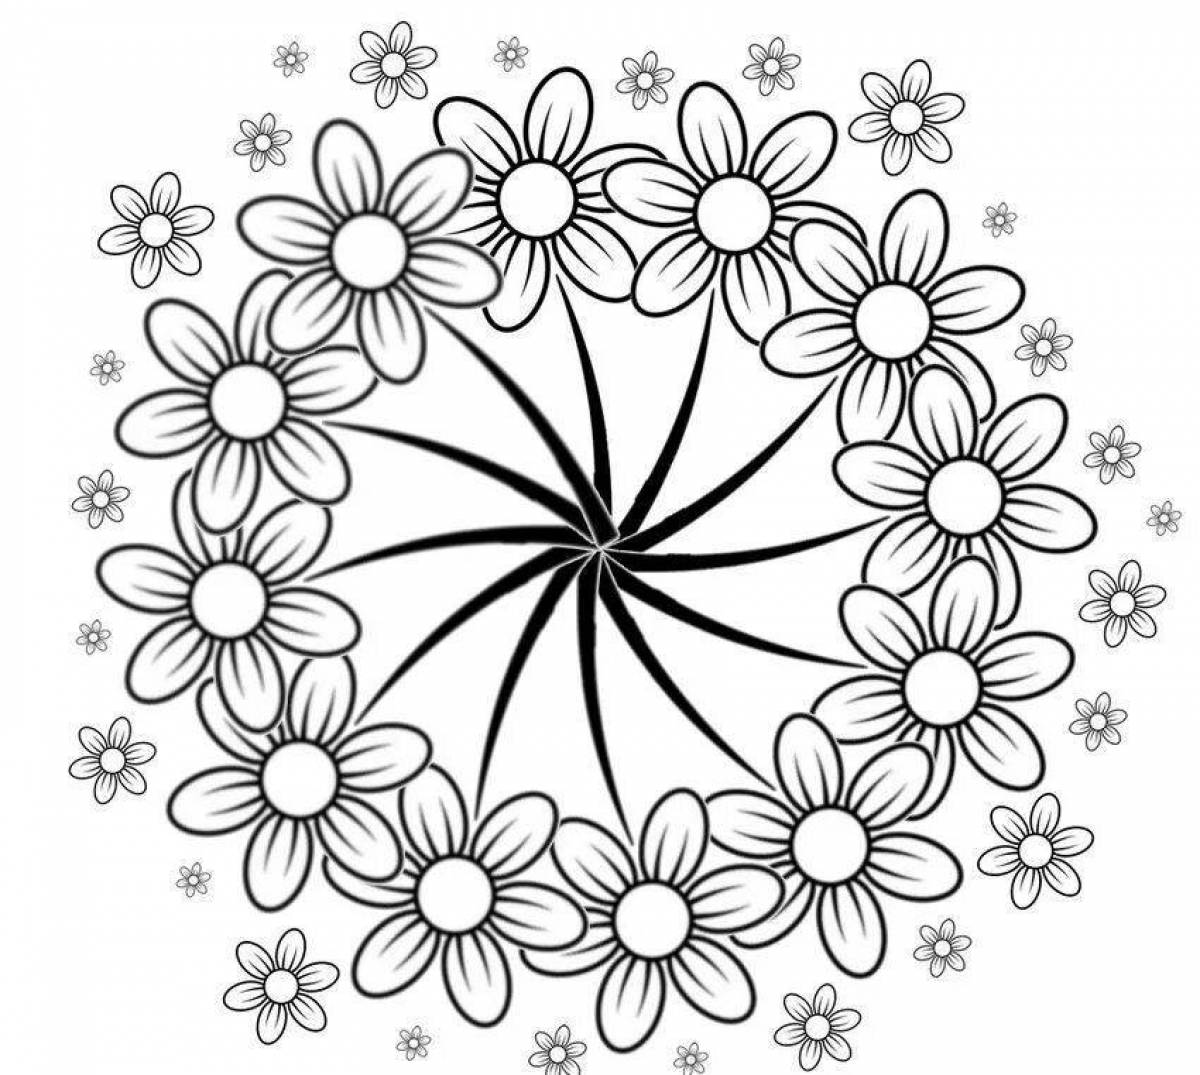 Coloring page dazzling chamomile flower